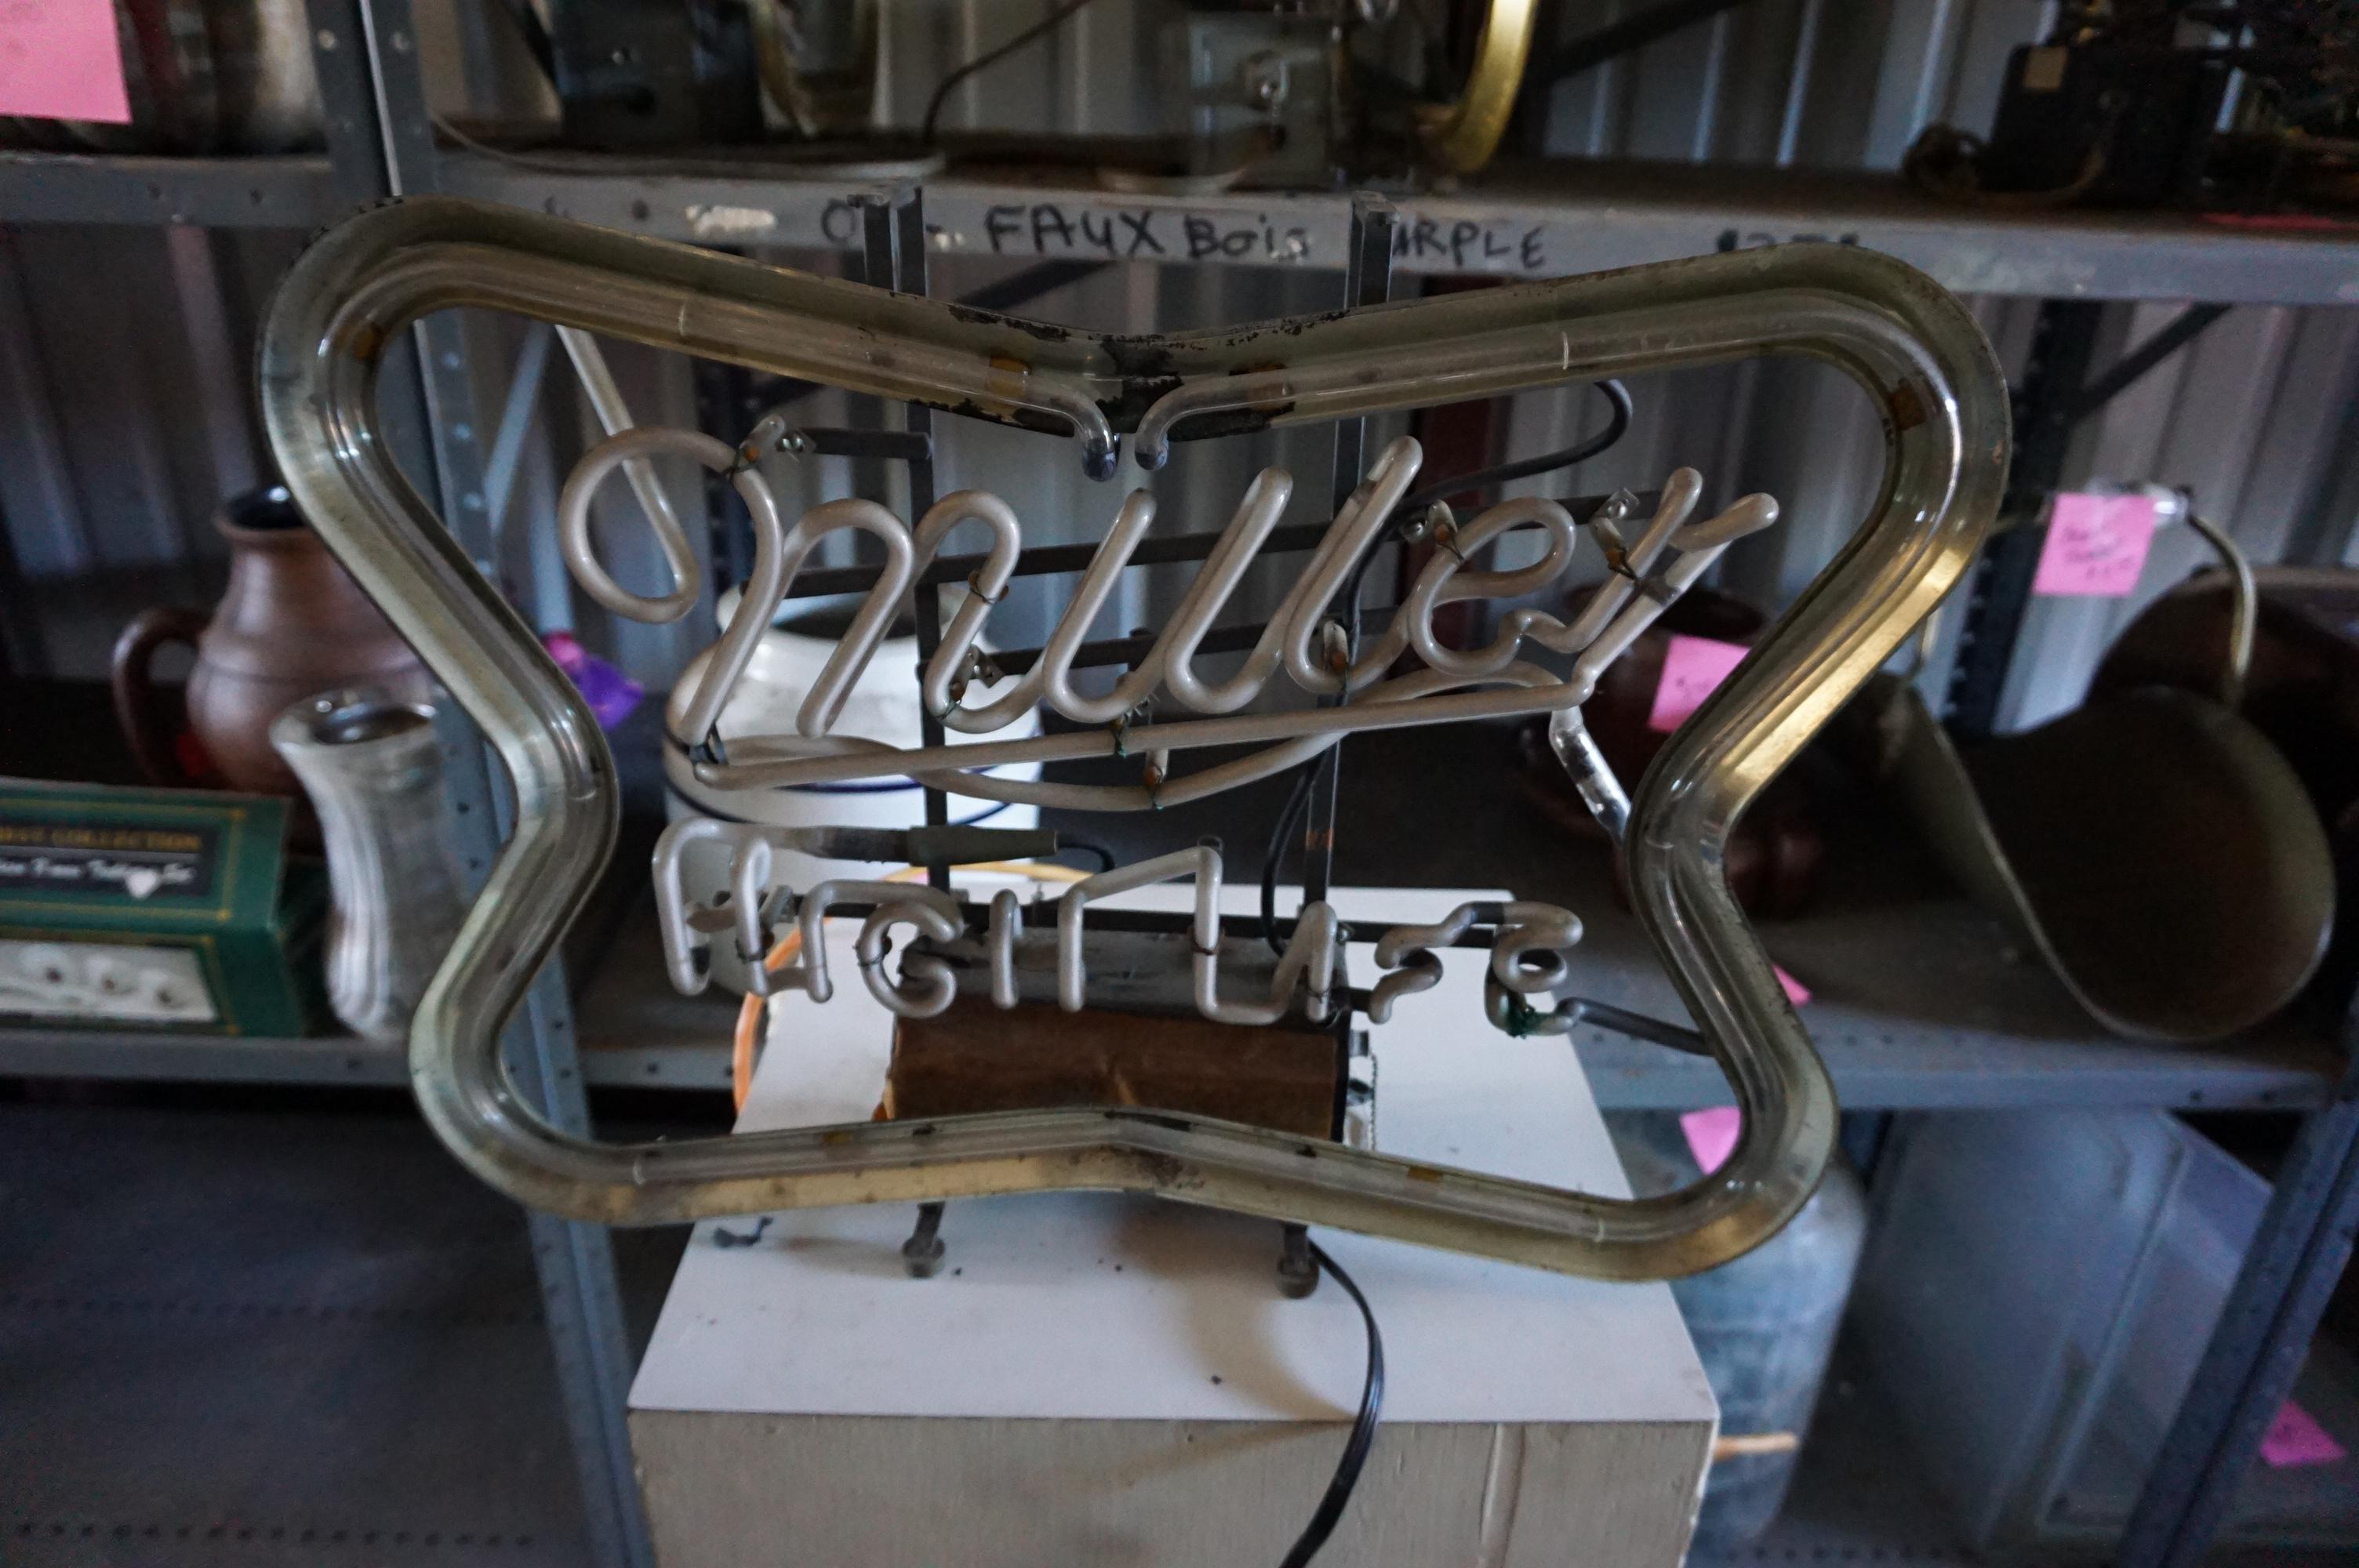 Miller High Life Working Neon Sign, Older Model, Dirty from storage, NO SHIPPING! PICK-UP ONLY!